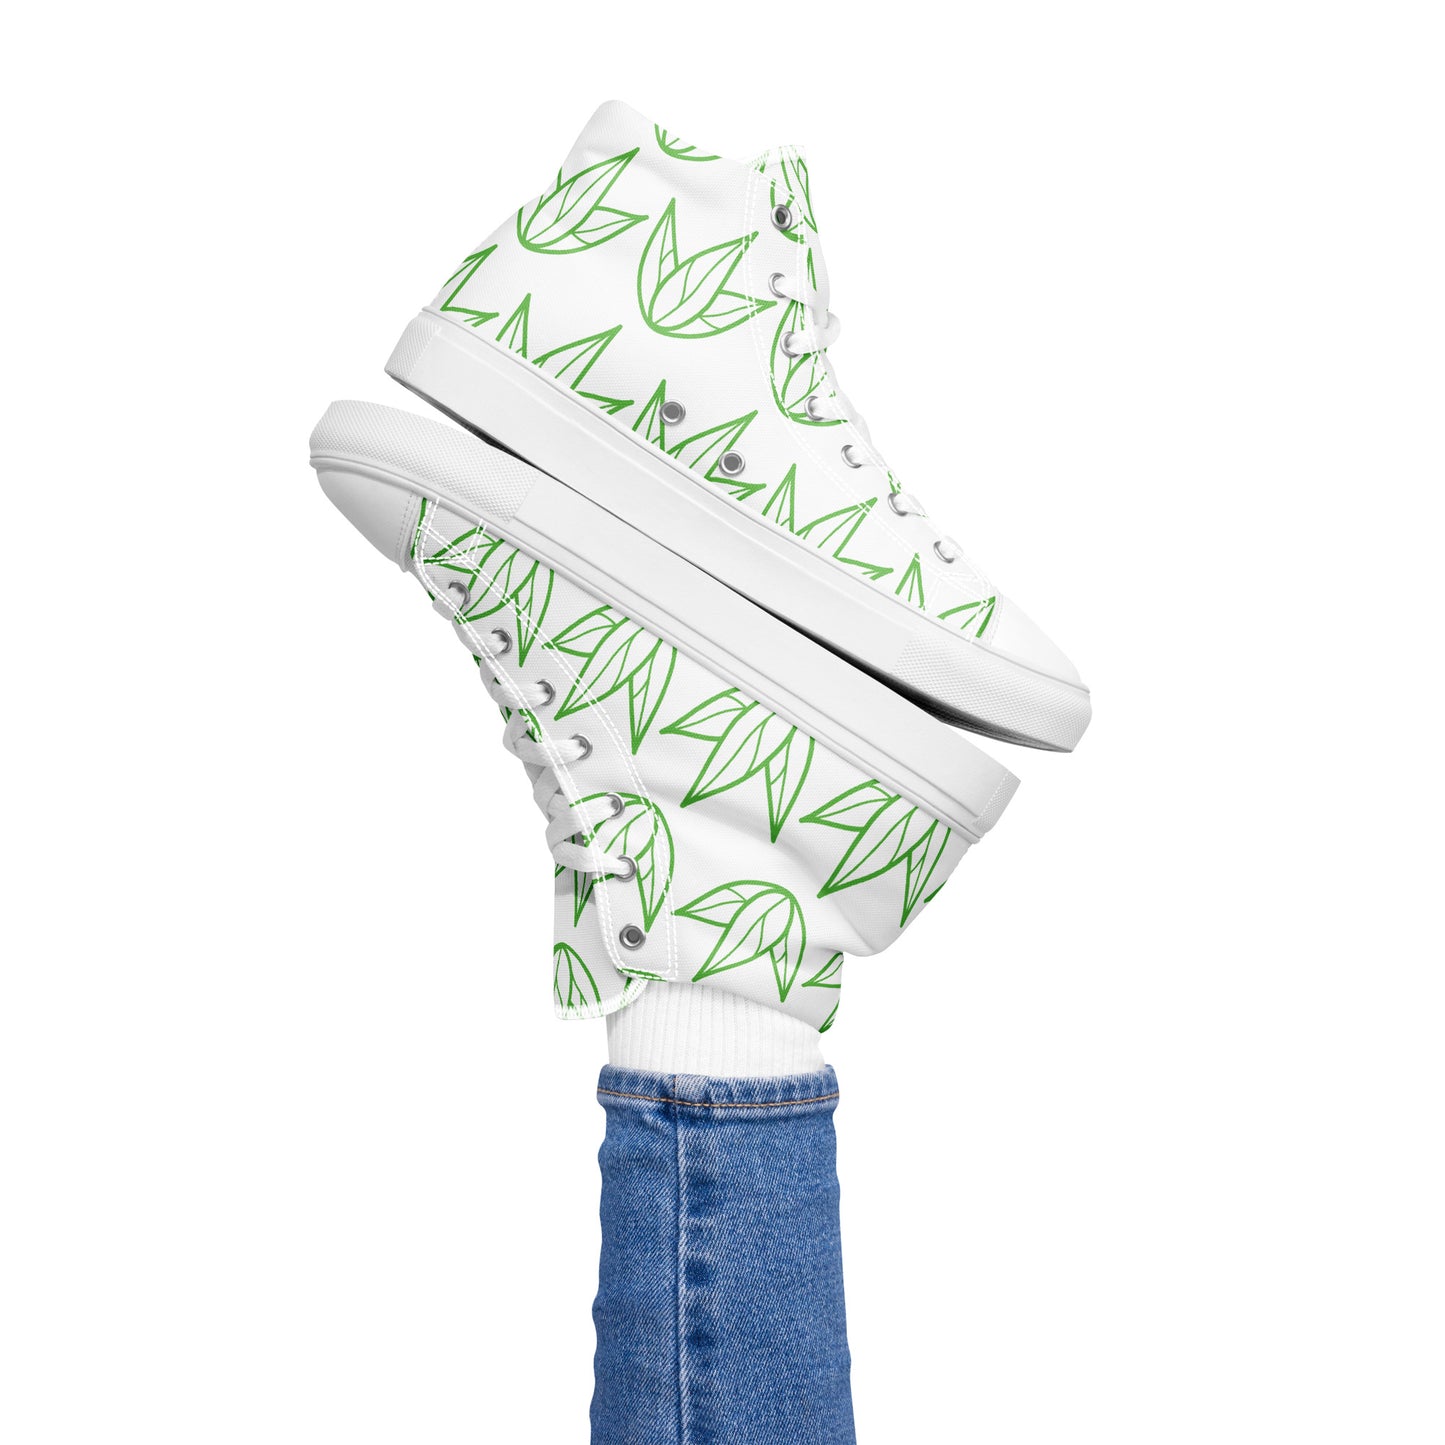 Vibrant Visions - Organic Health & Wellness - HD, Comfortable, Women’s high top style, canvas shoes, High Top Women's Sneakers